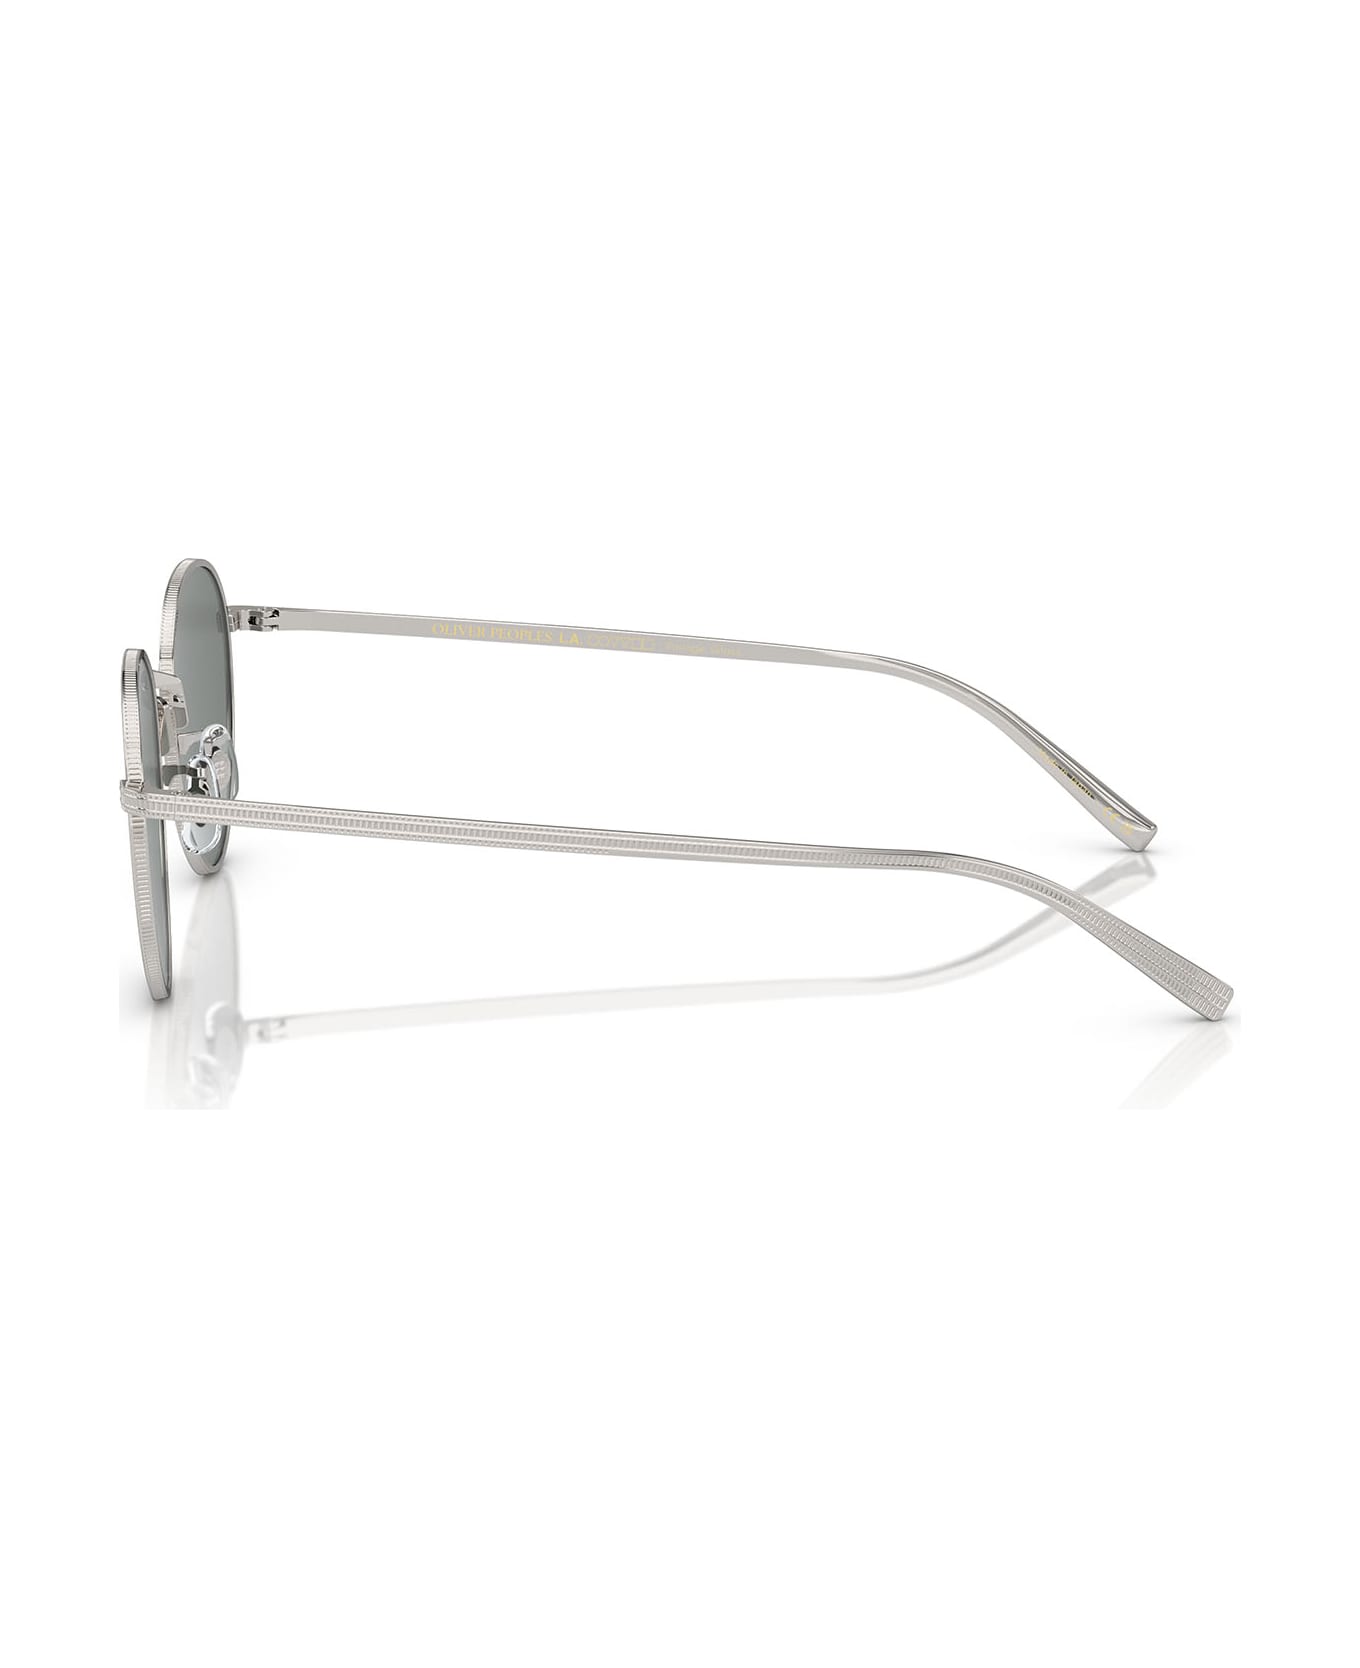 Oliver Peoples Ov1336st Silver Sunglasses - Silver サングラス